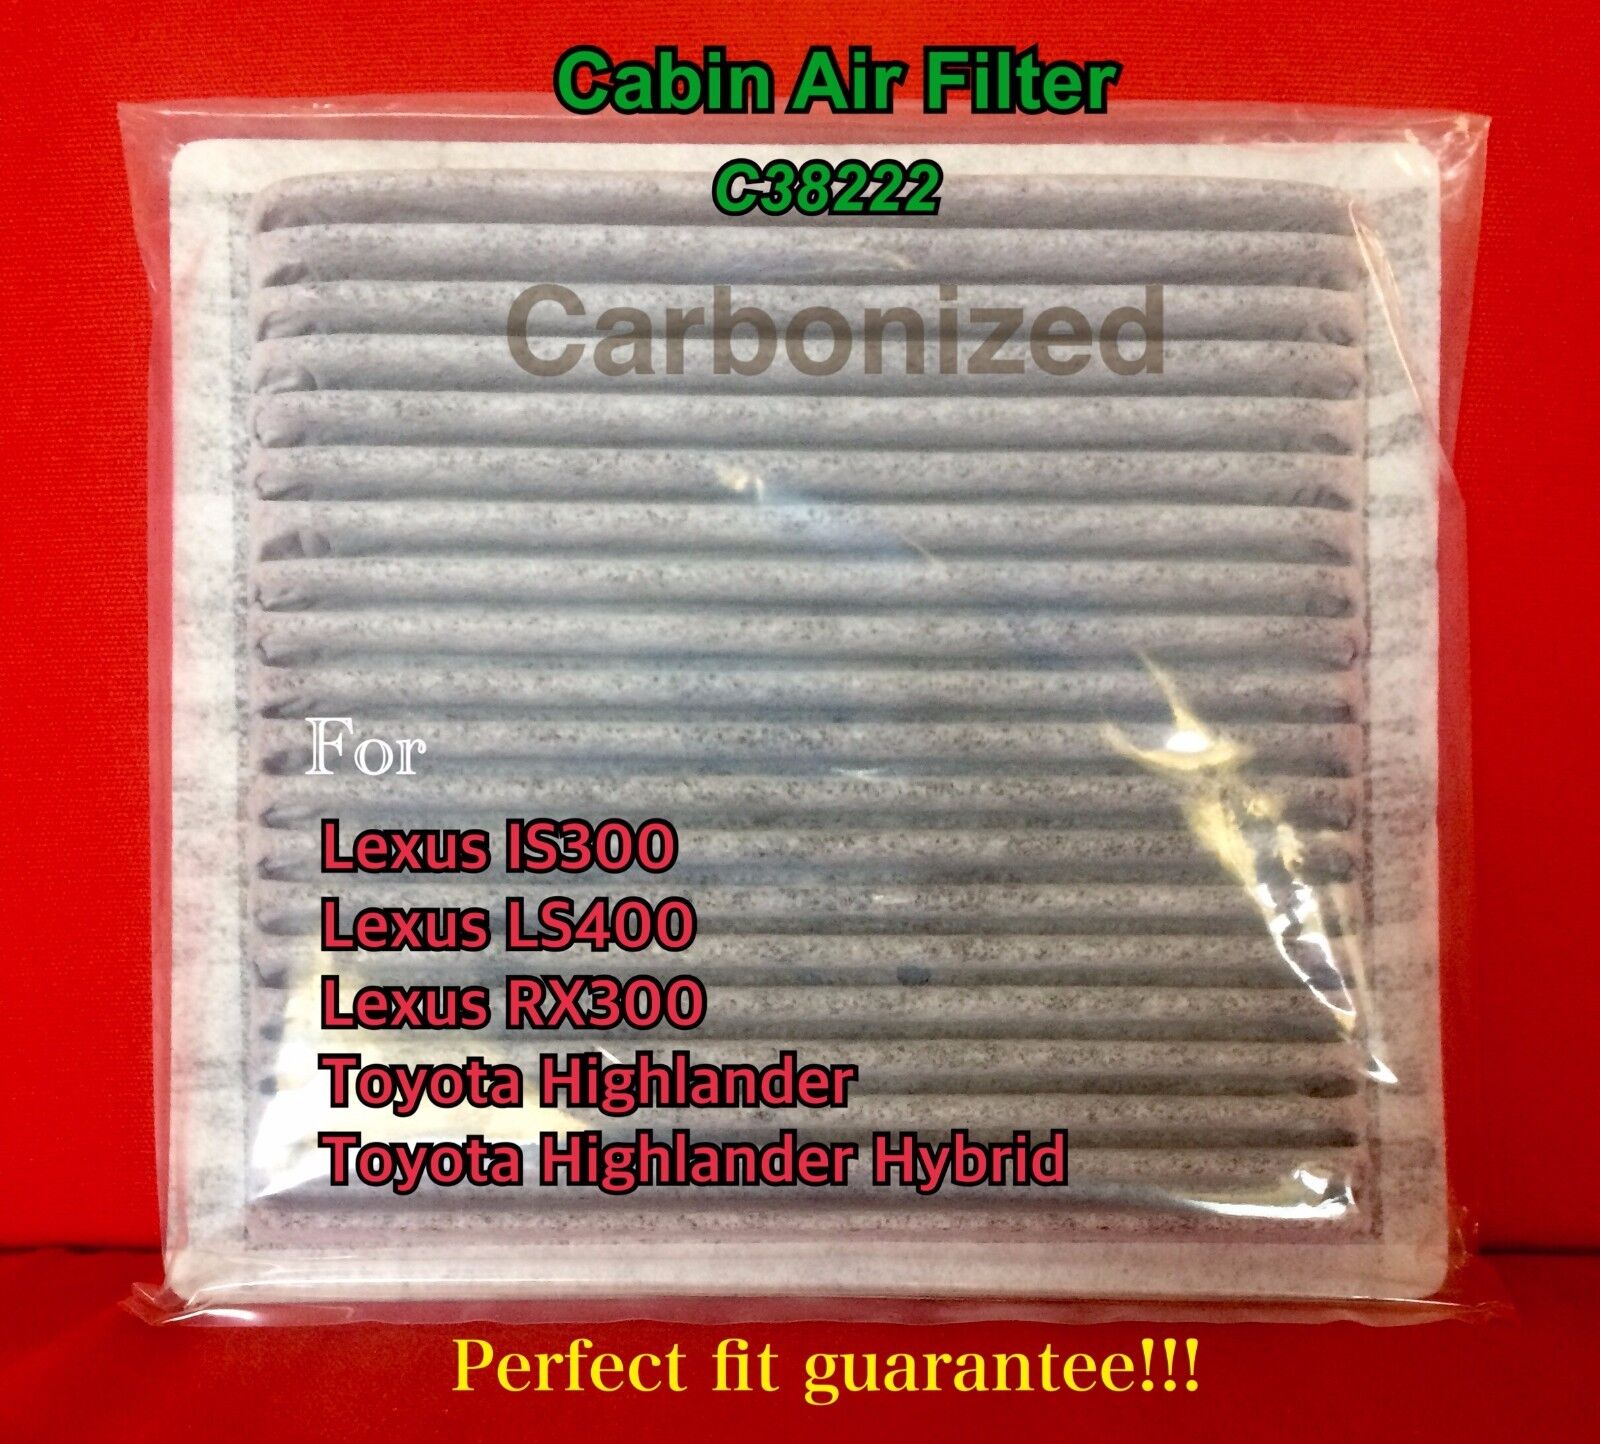 C38222 AC  Carbonized CABIN AIR FILTER For IS300 LS400 RX300 HIGHLANDER 